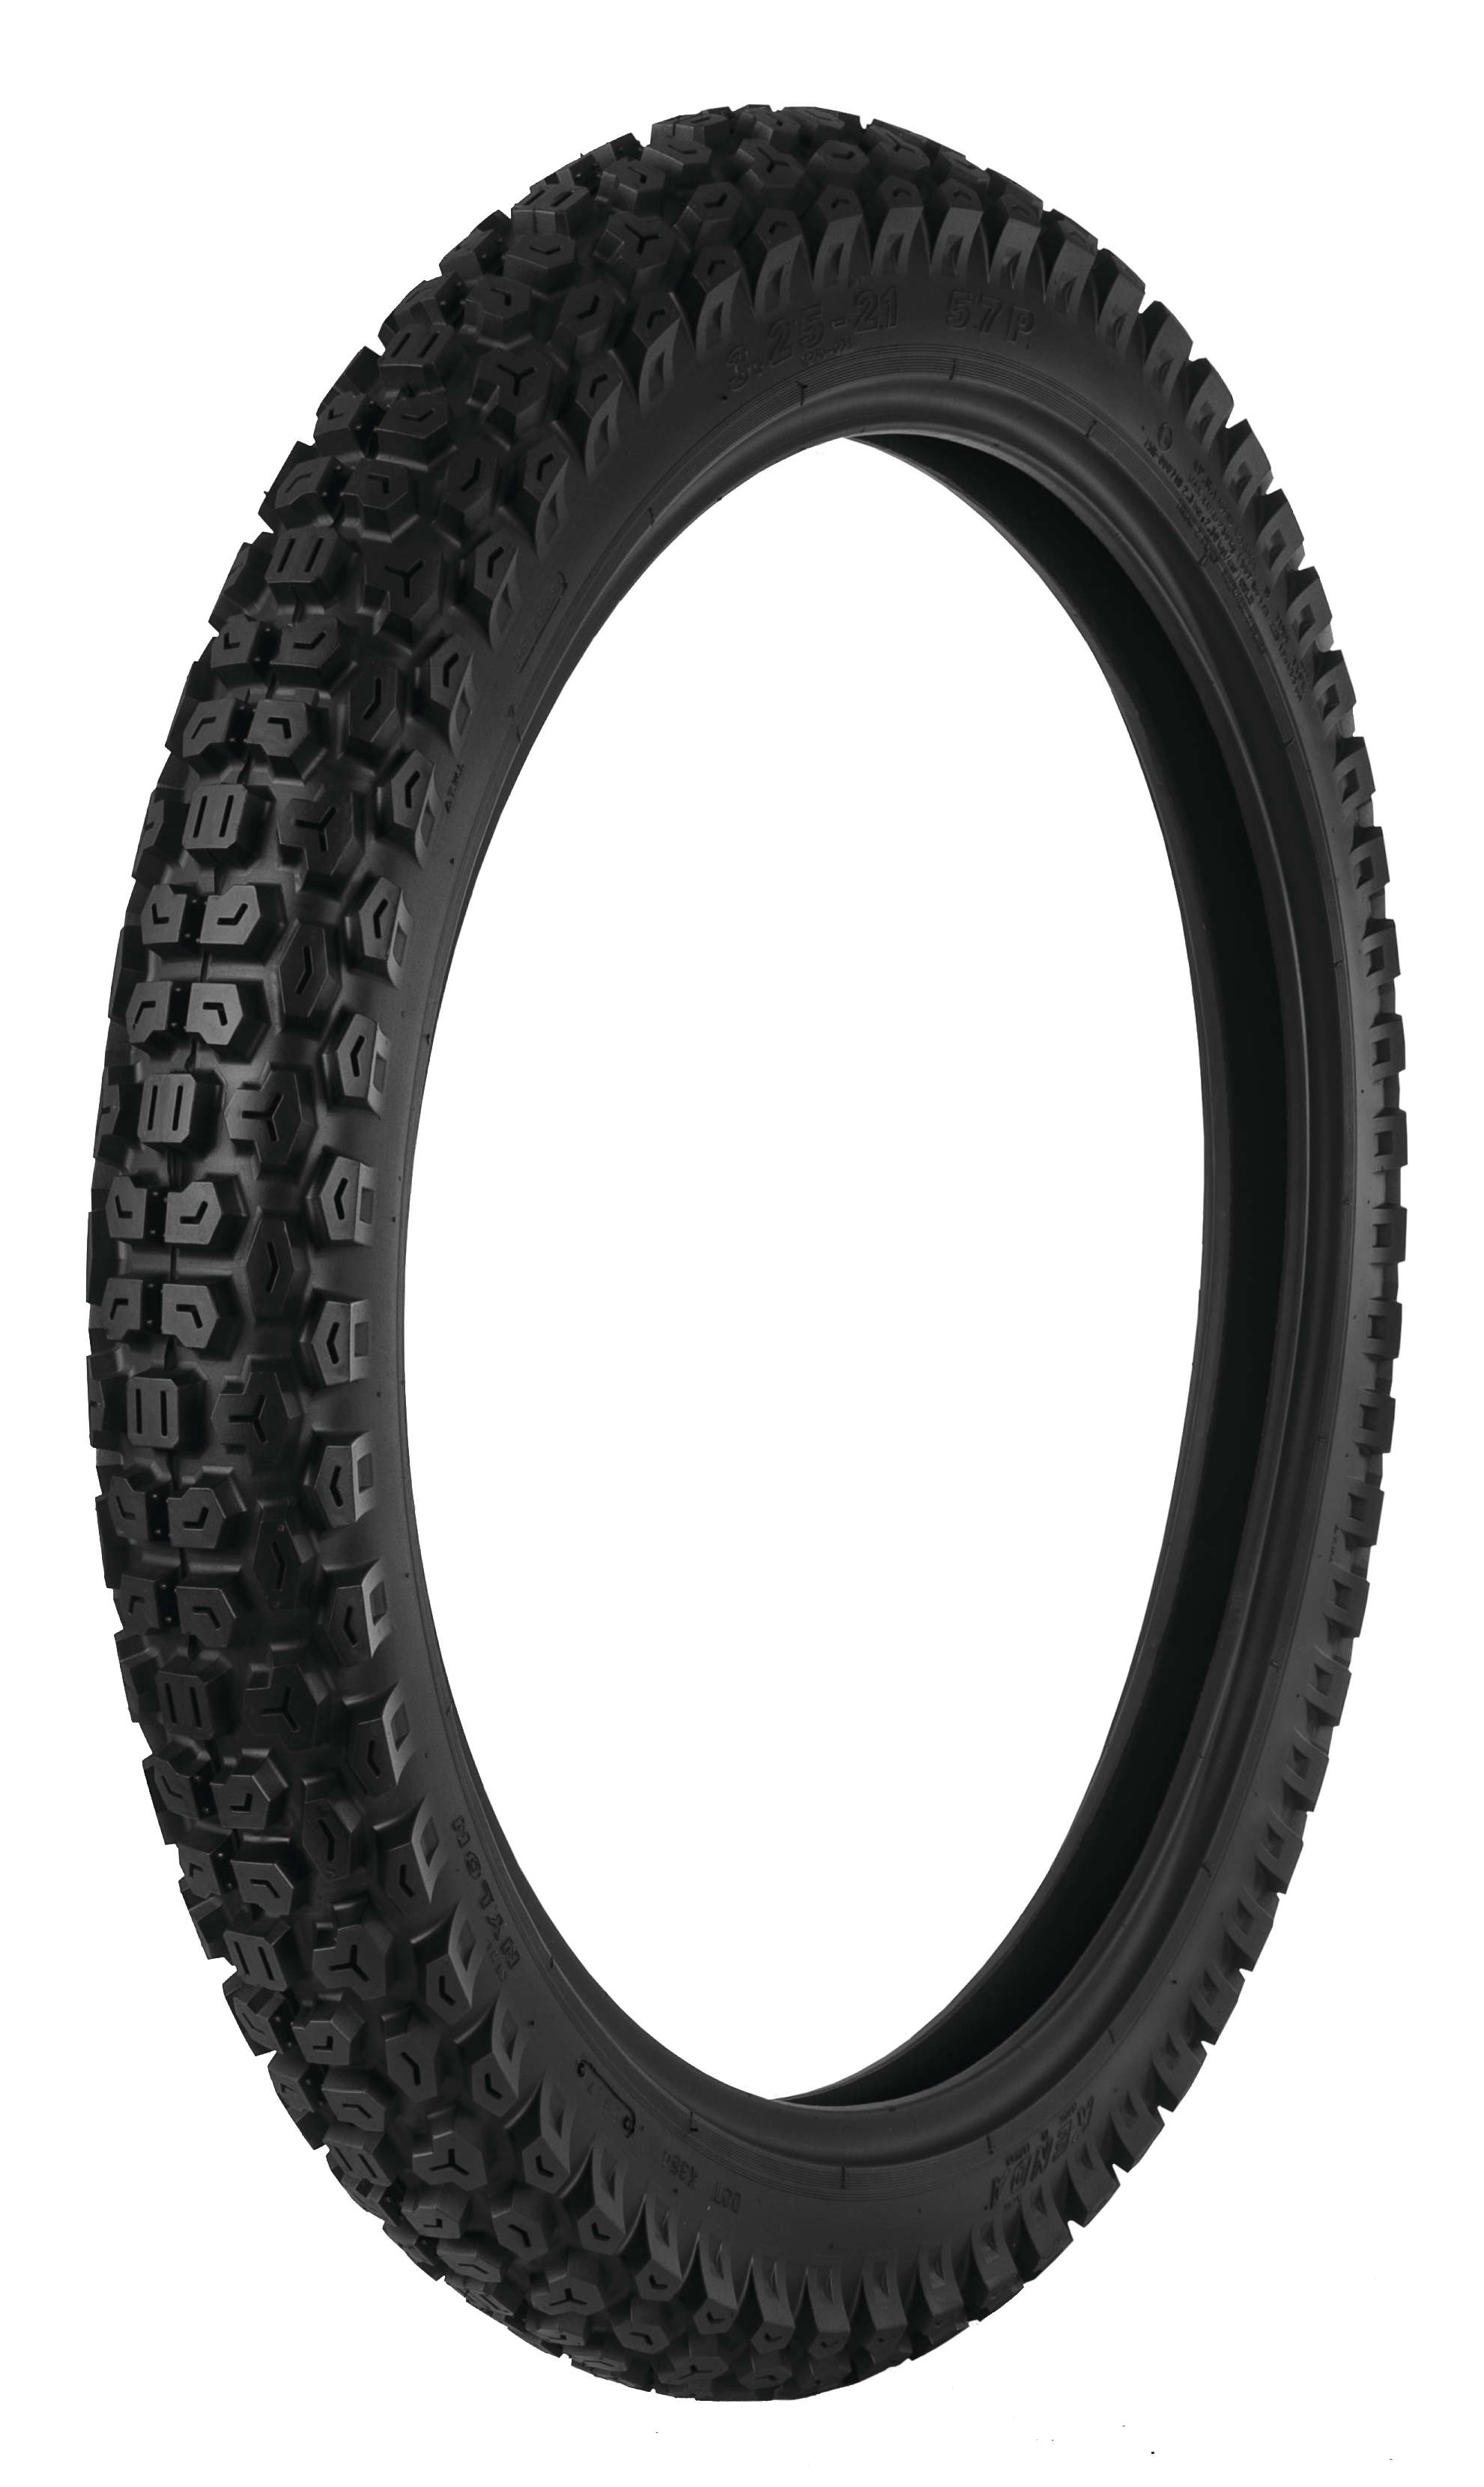 K270 Dual Sport 3.00-21 Front Tire - Click Image to Close